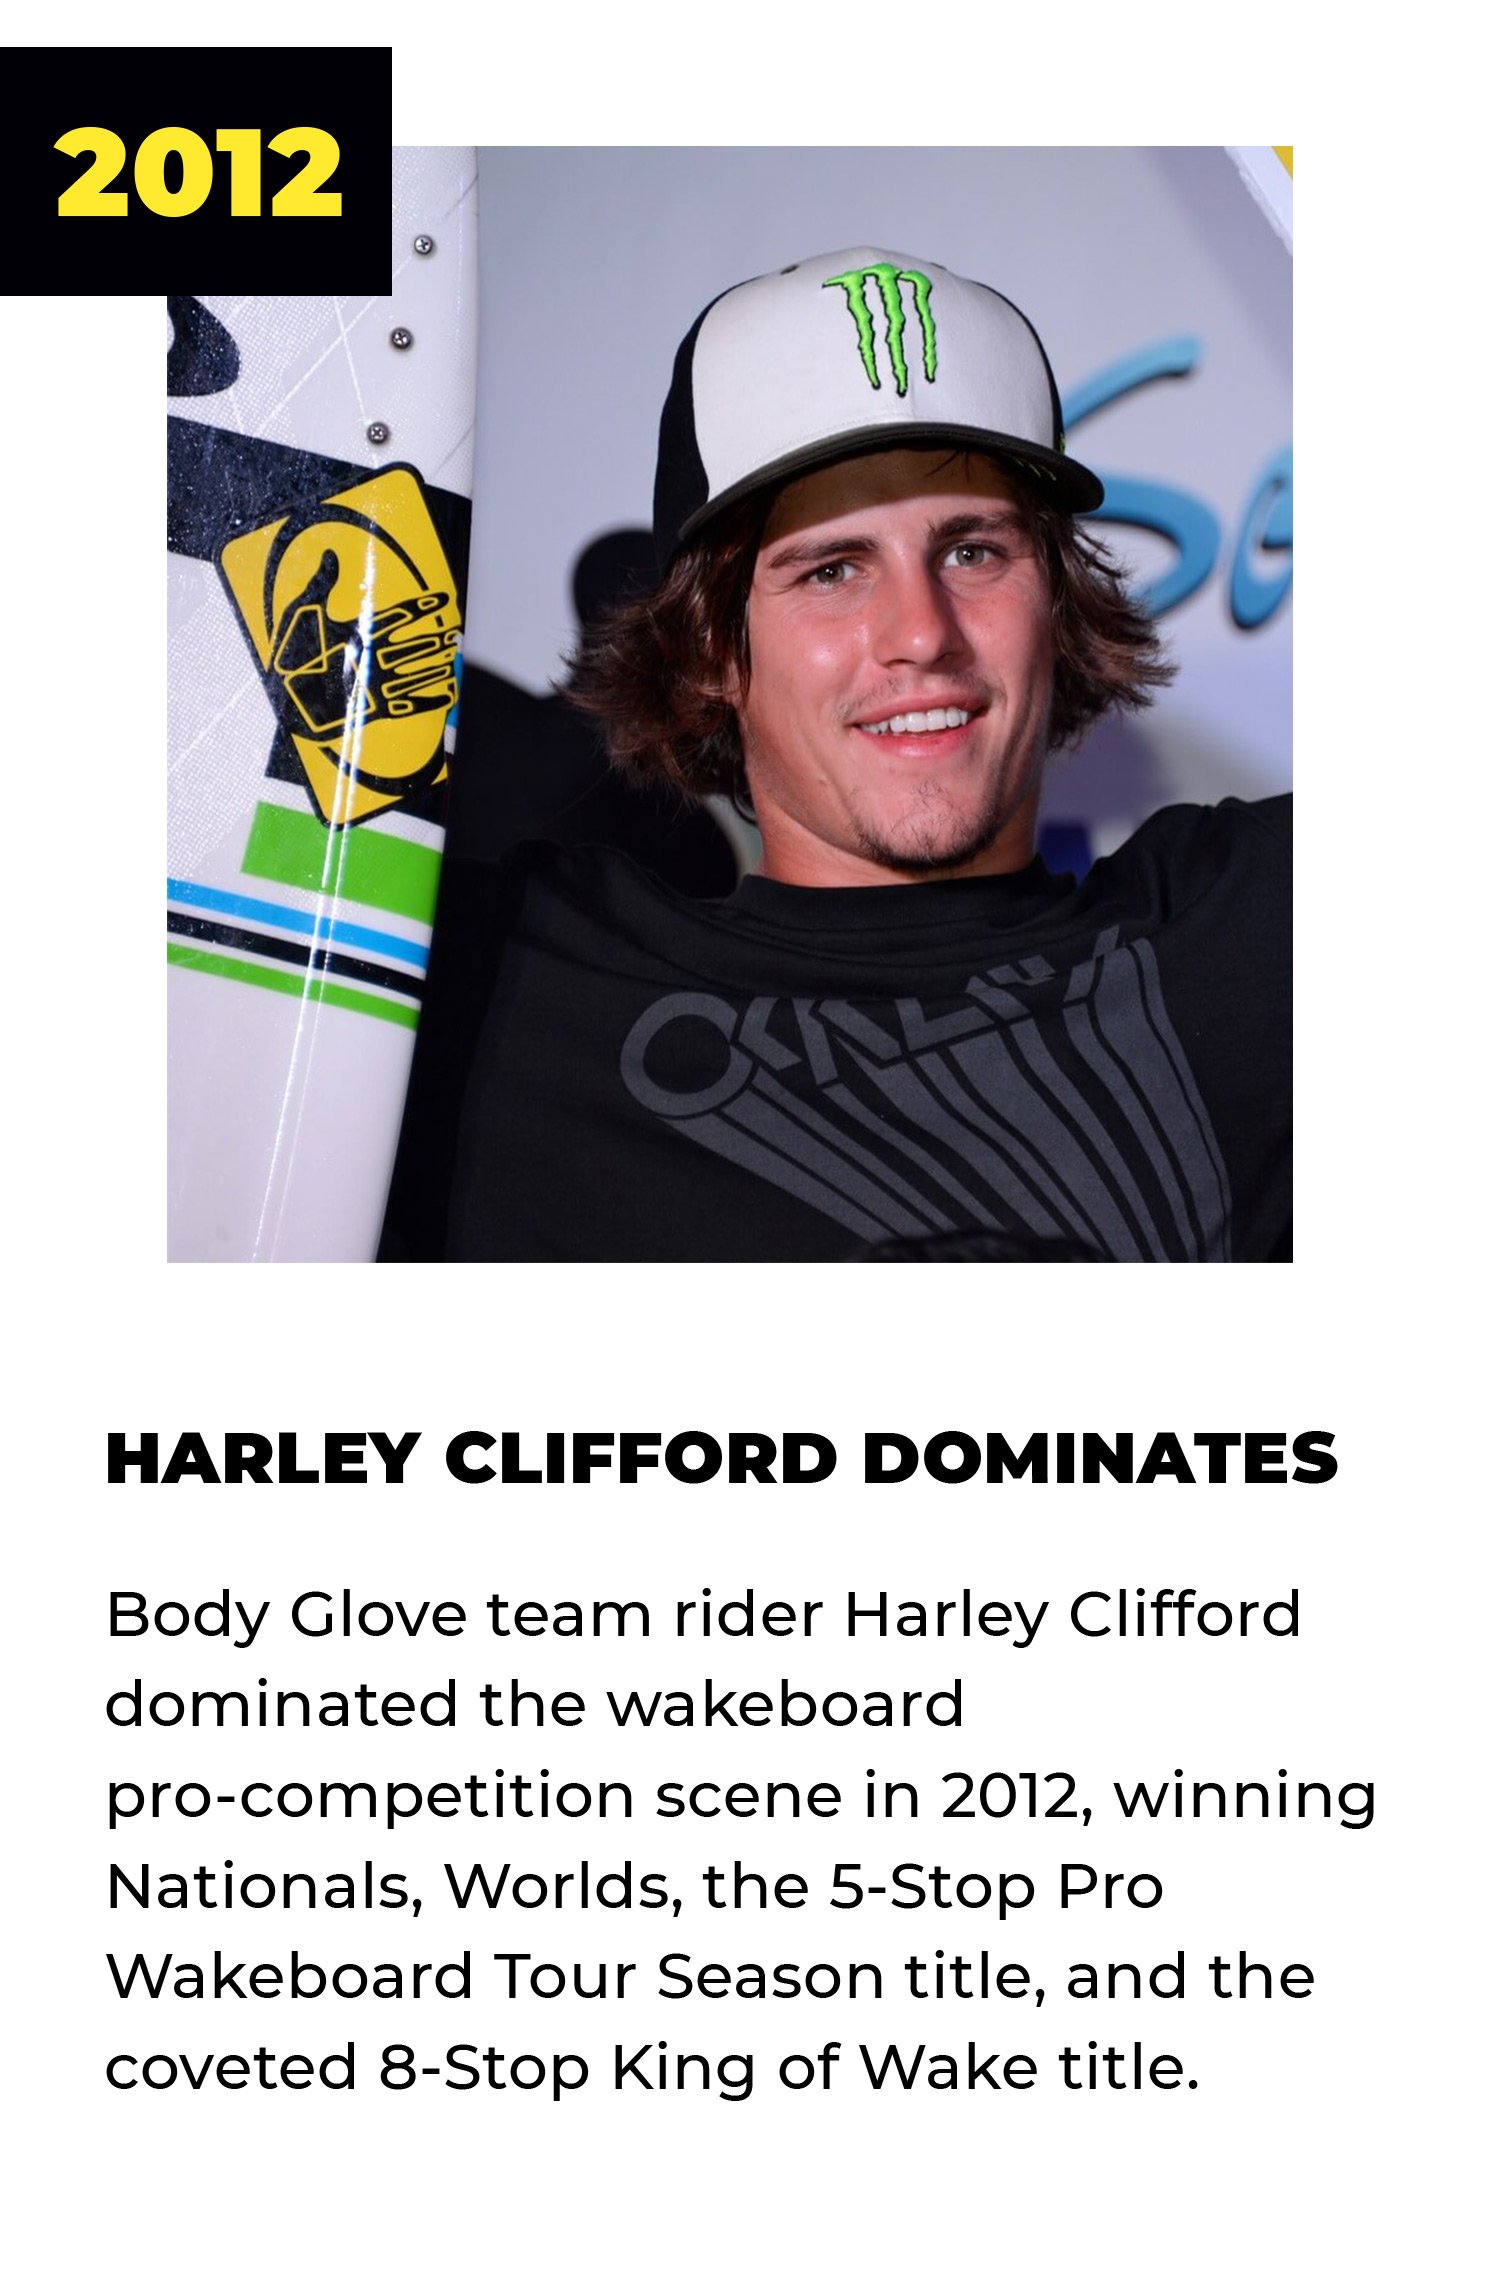 2012 | Harley Clifford Dominates | Body Glove team rider Harley Clifford dominated the wakeboard pro-competition scene in 2012, winning Nationals, Worlds, the 5-Stop Pro Wakeboard Tour Season Title and the coveted 8-Stop King of Wake title.